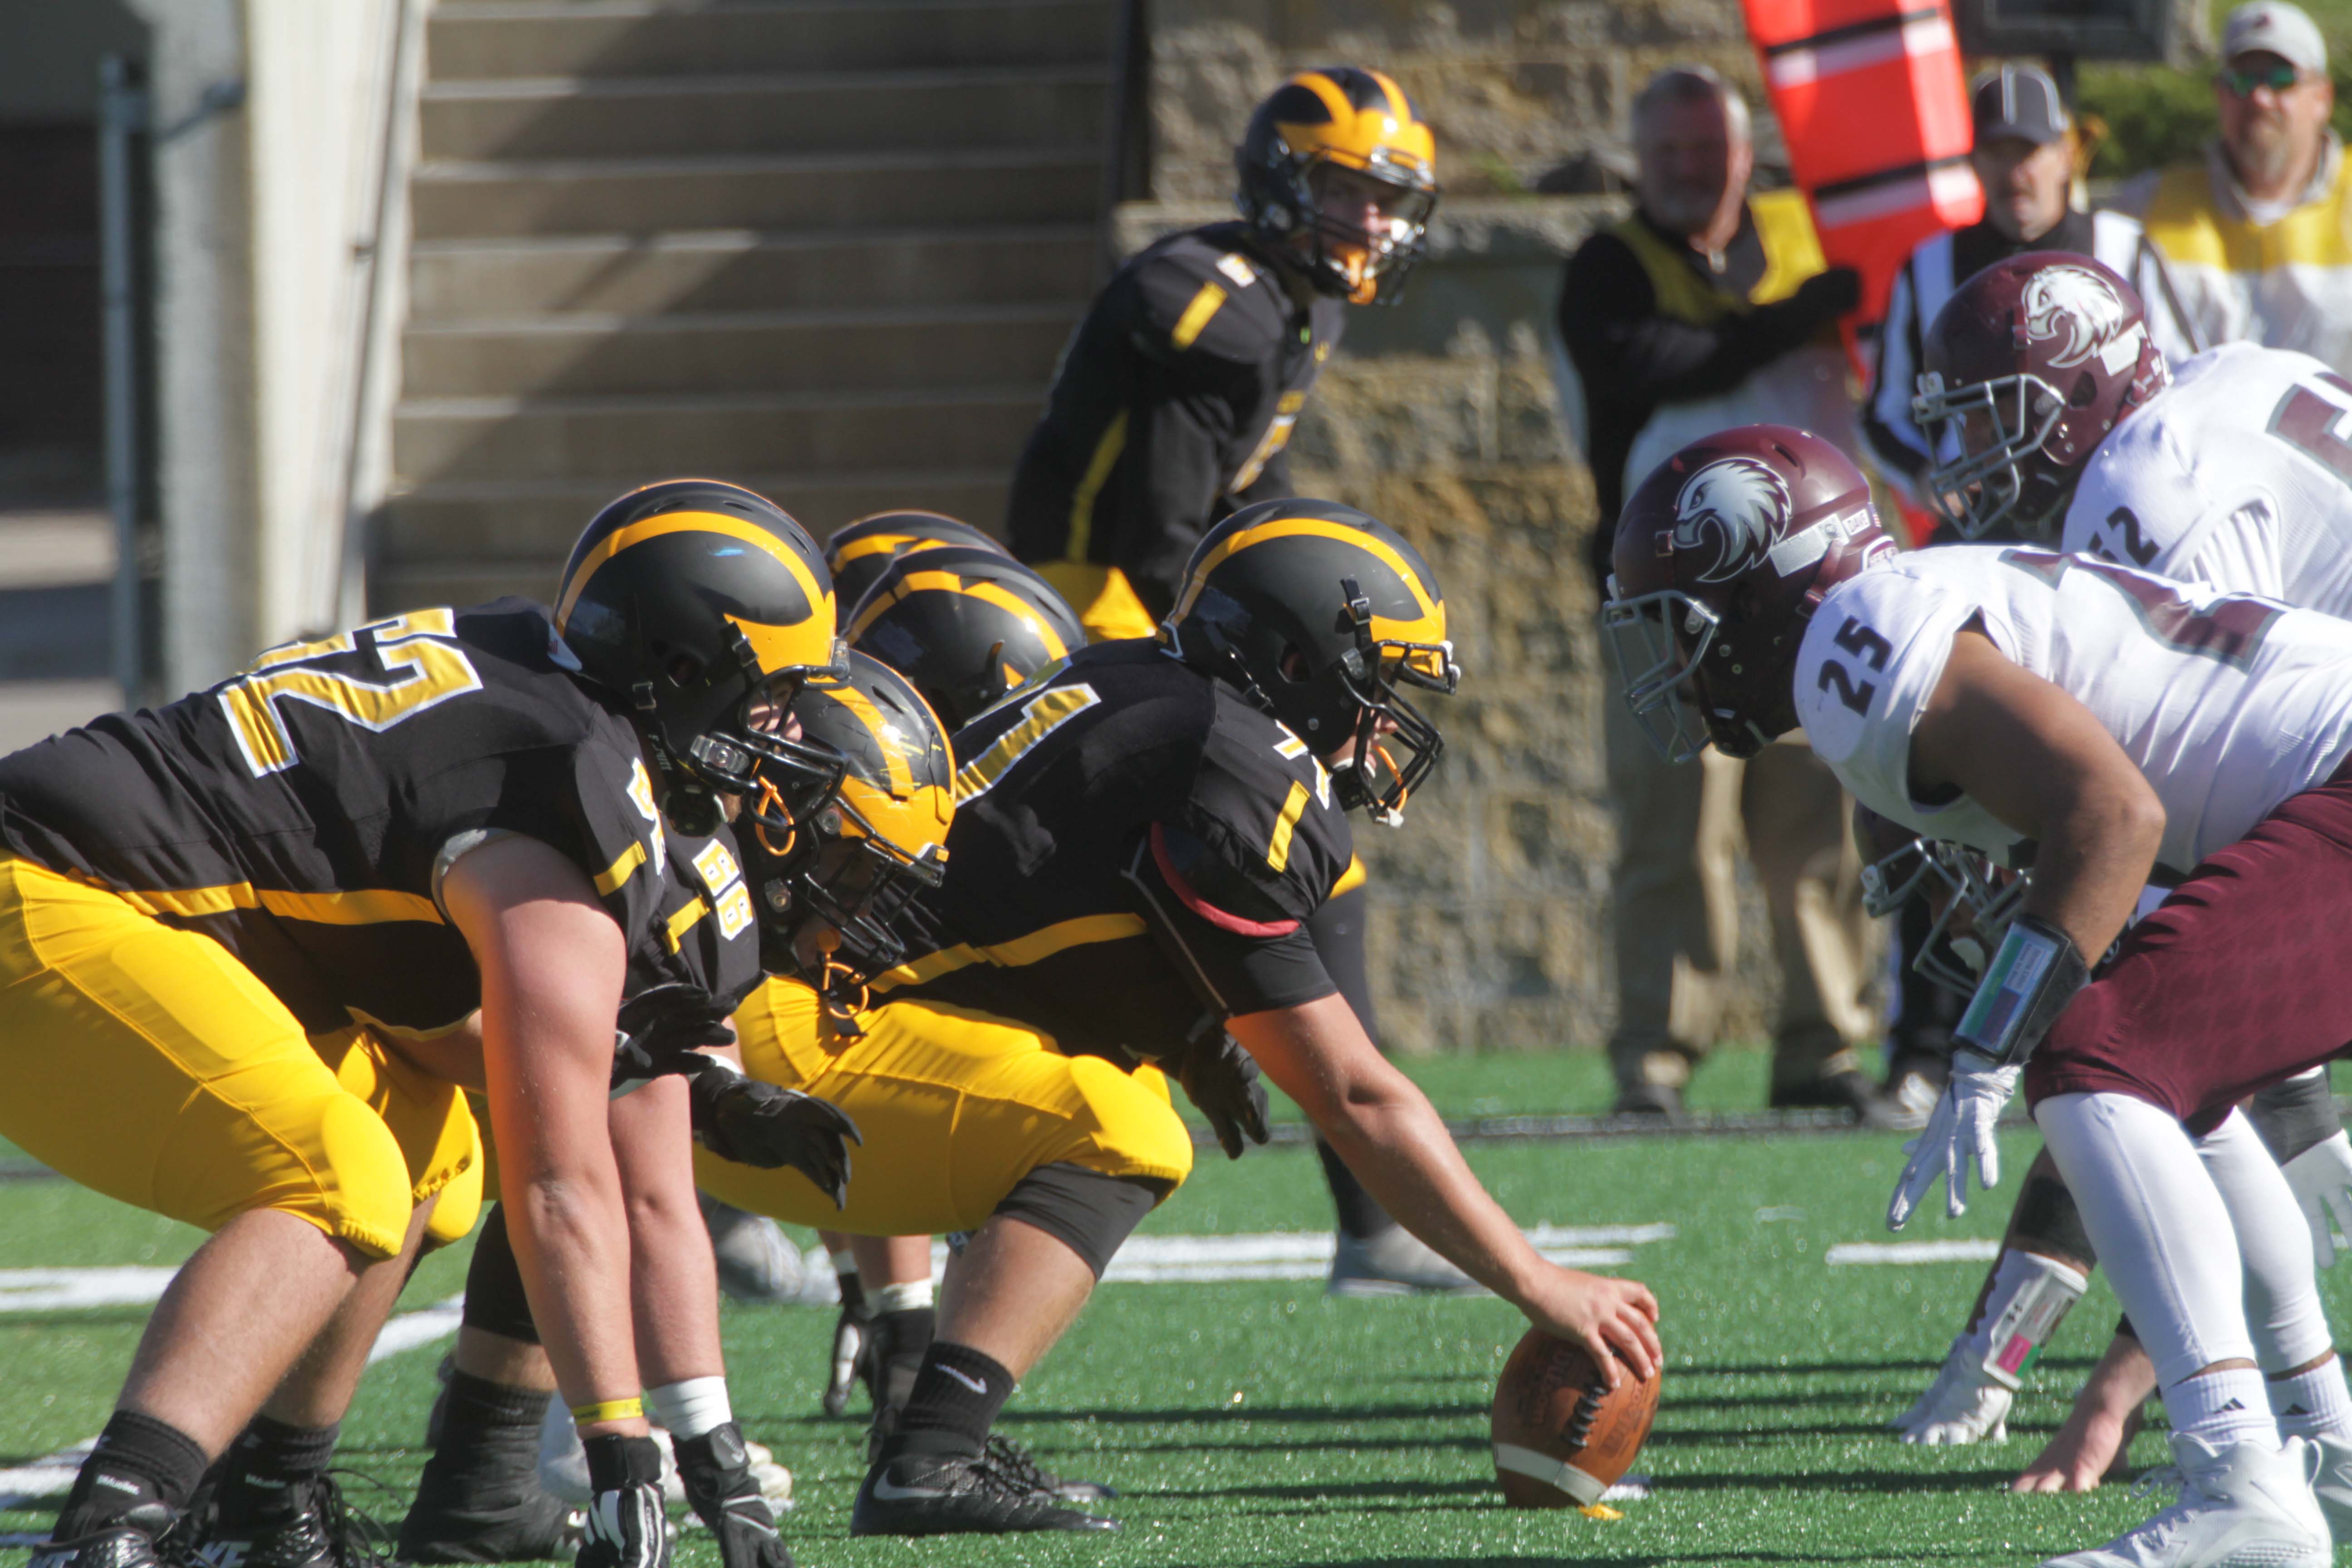 The Gustie offensive line sets up to snap the ball during a game against Augsburg. The team is currently on a four game winning streak heading into their game this Saturday against the Tommies.